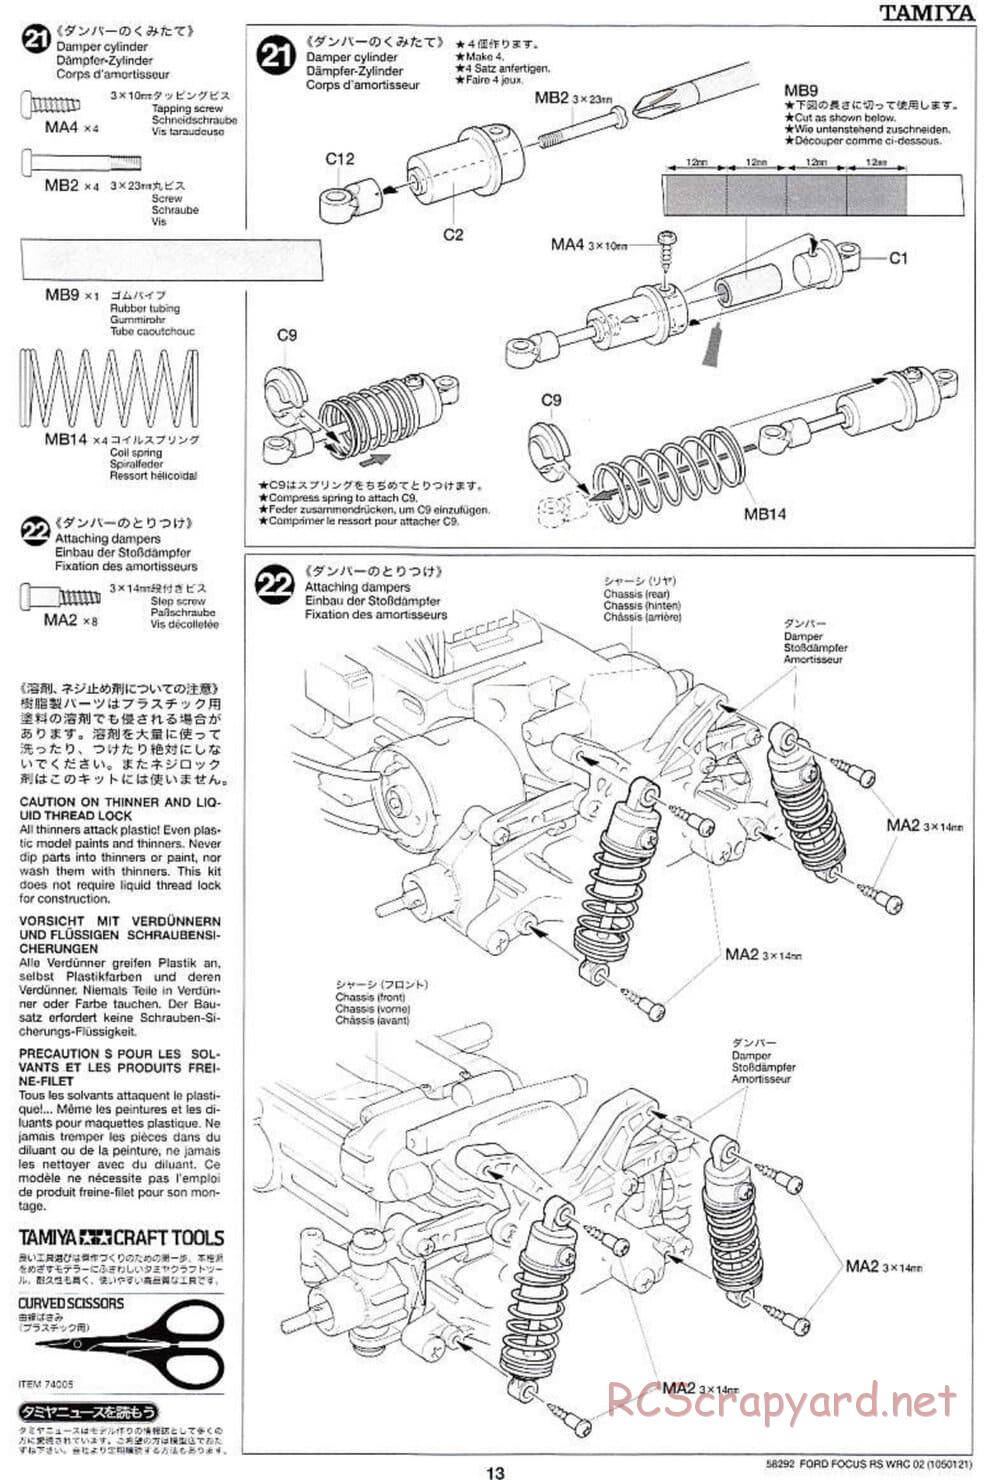 Tamiya - Ford Focus RS WRC 02 - TL-01 Chassis - Manual - Page 13